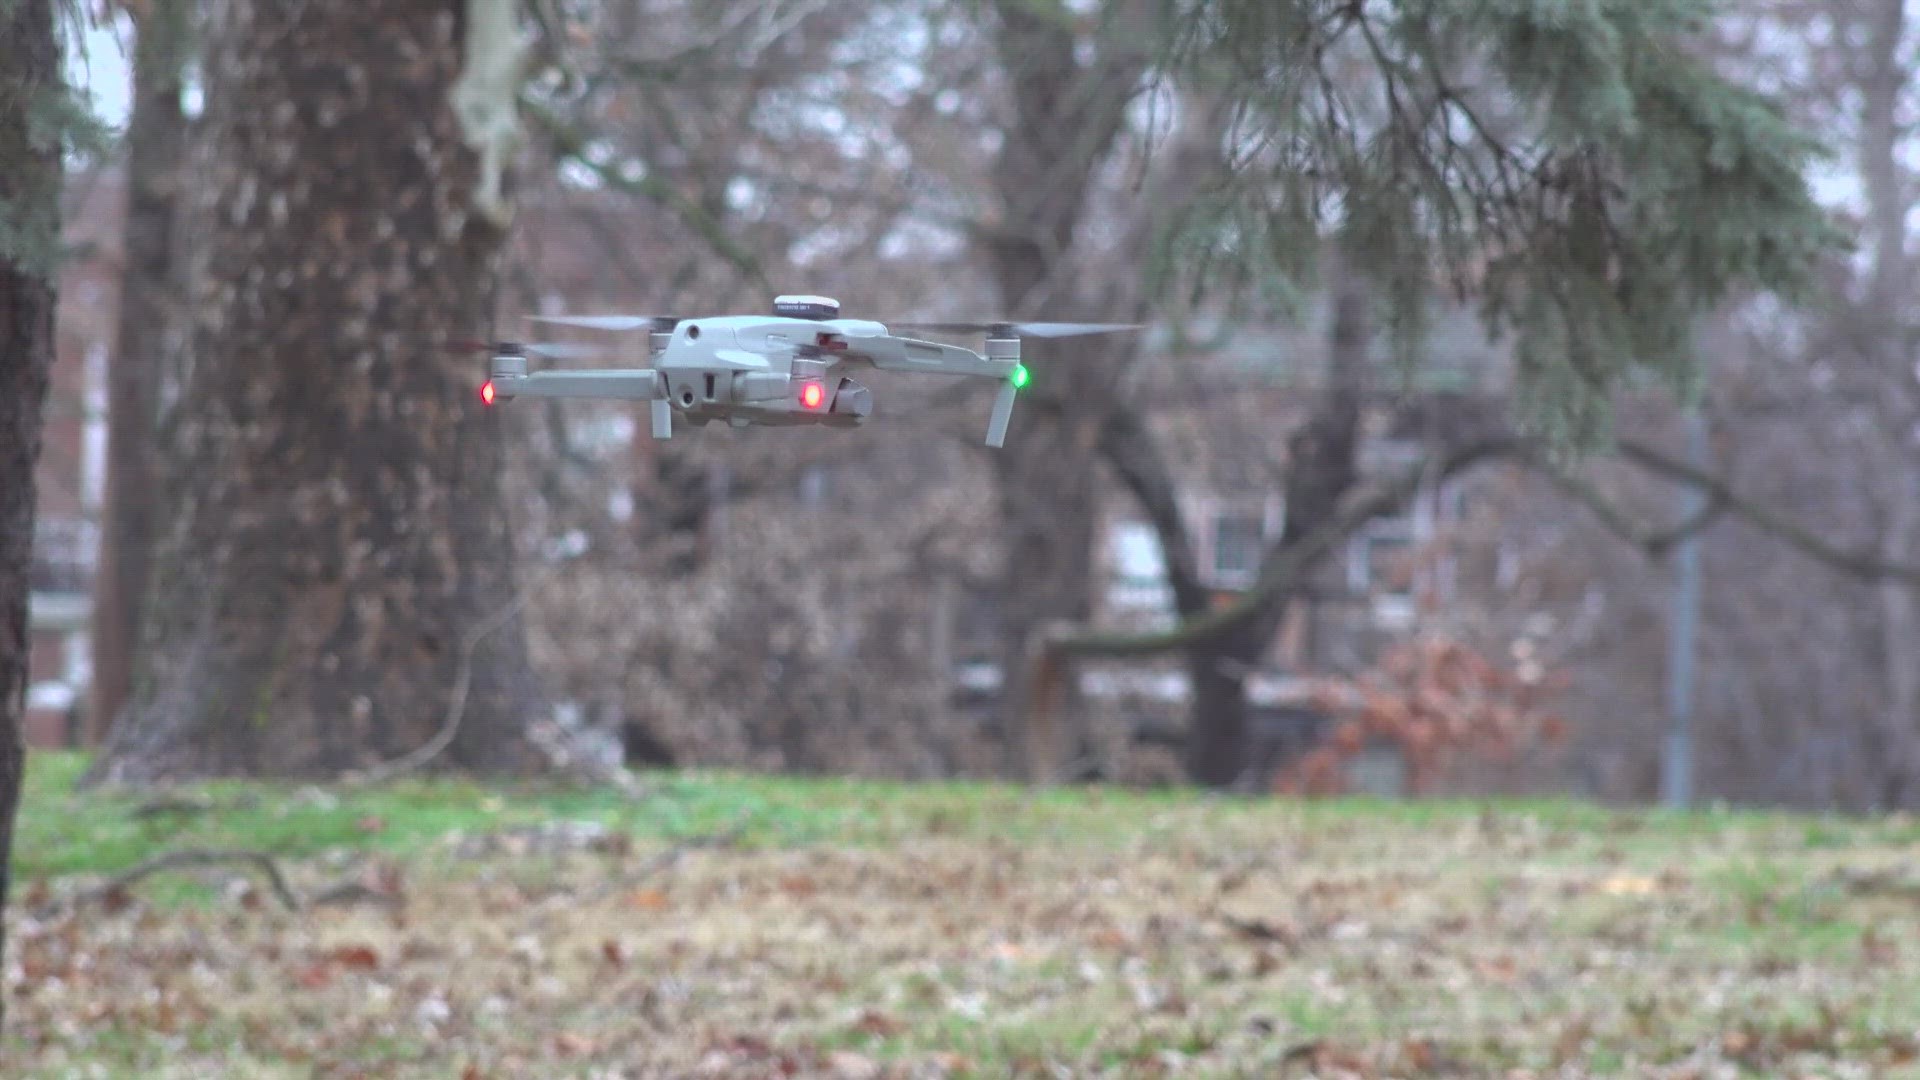 SMS Novel, a Washington, D.C.-based film company wants to use surveillance drones to curb crime in St. Louis.